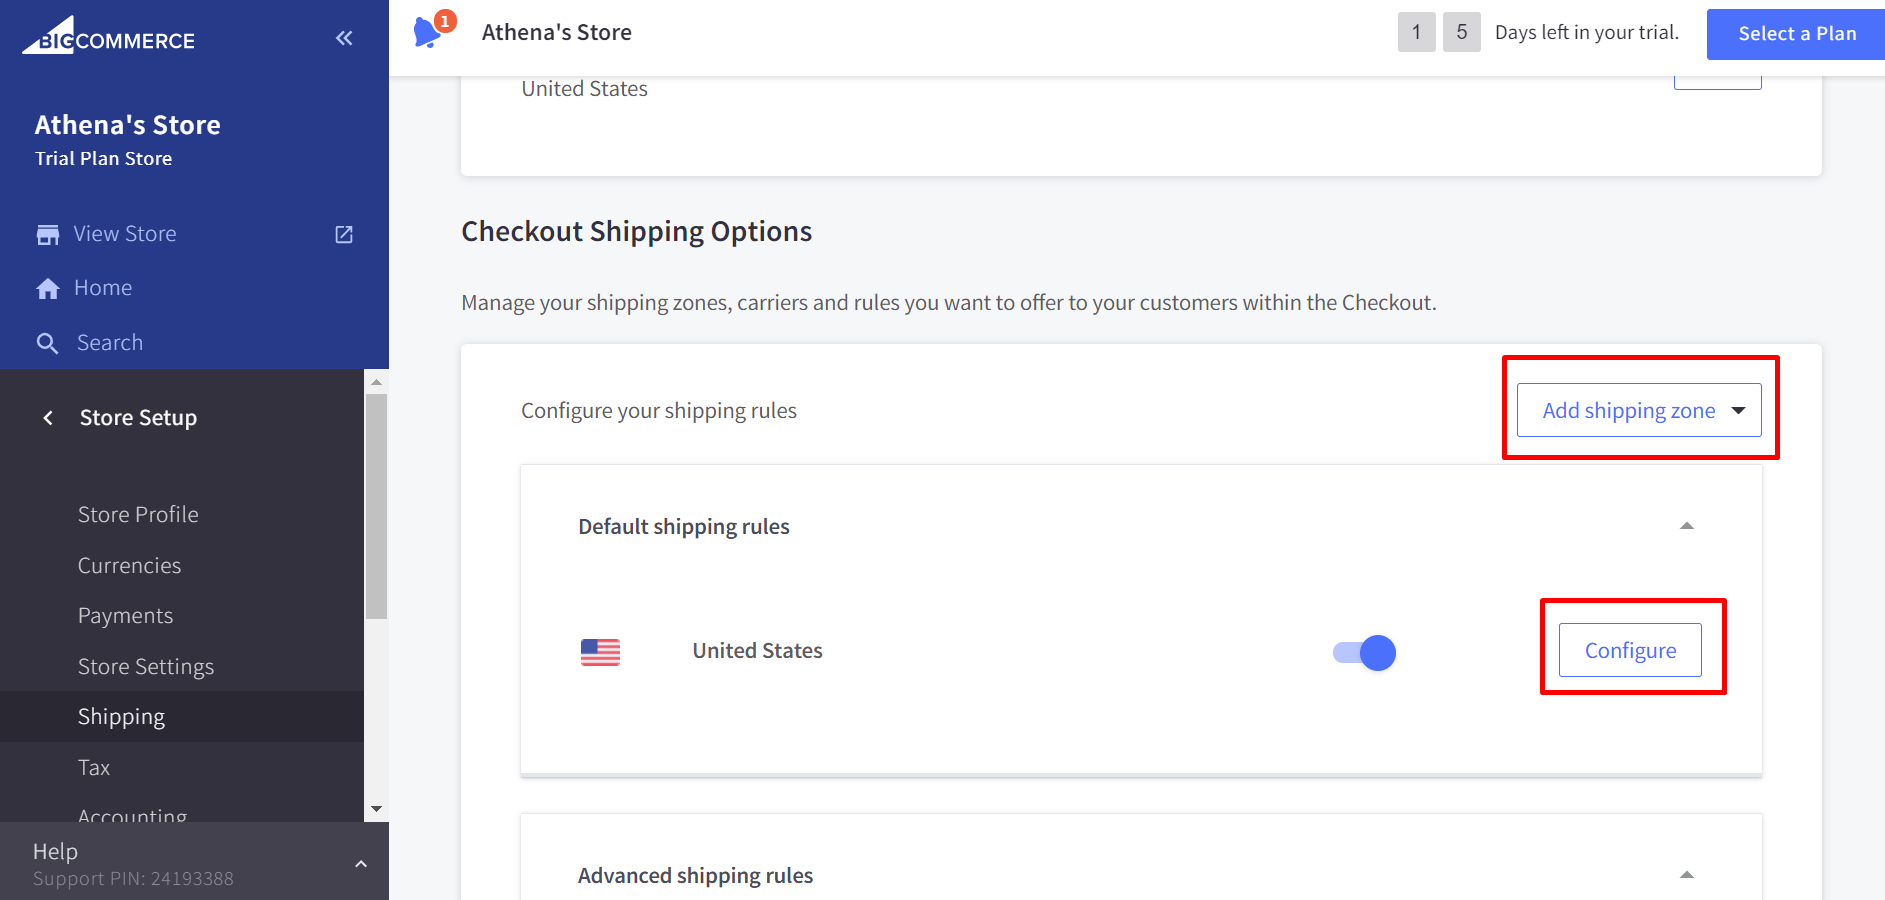 Click Edit or Configure next to a shipping zone > Shipping